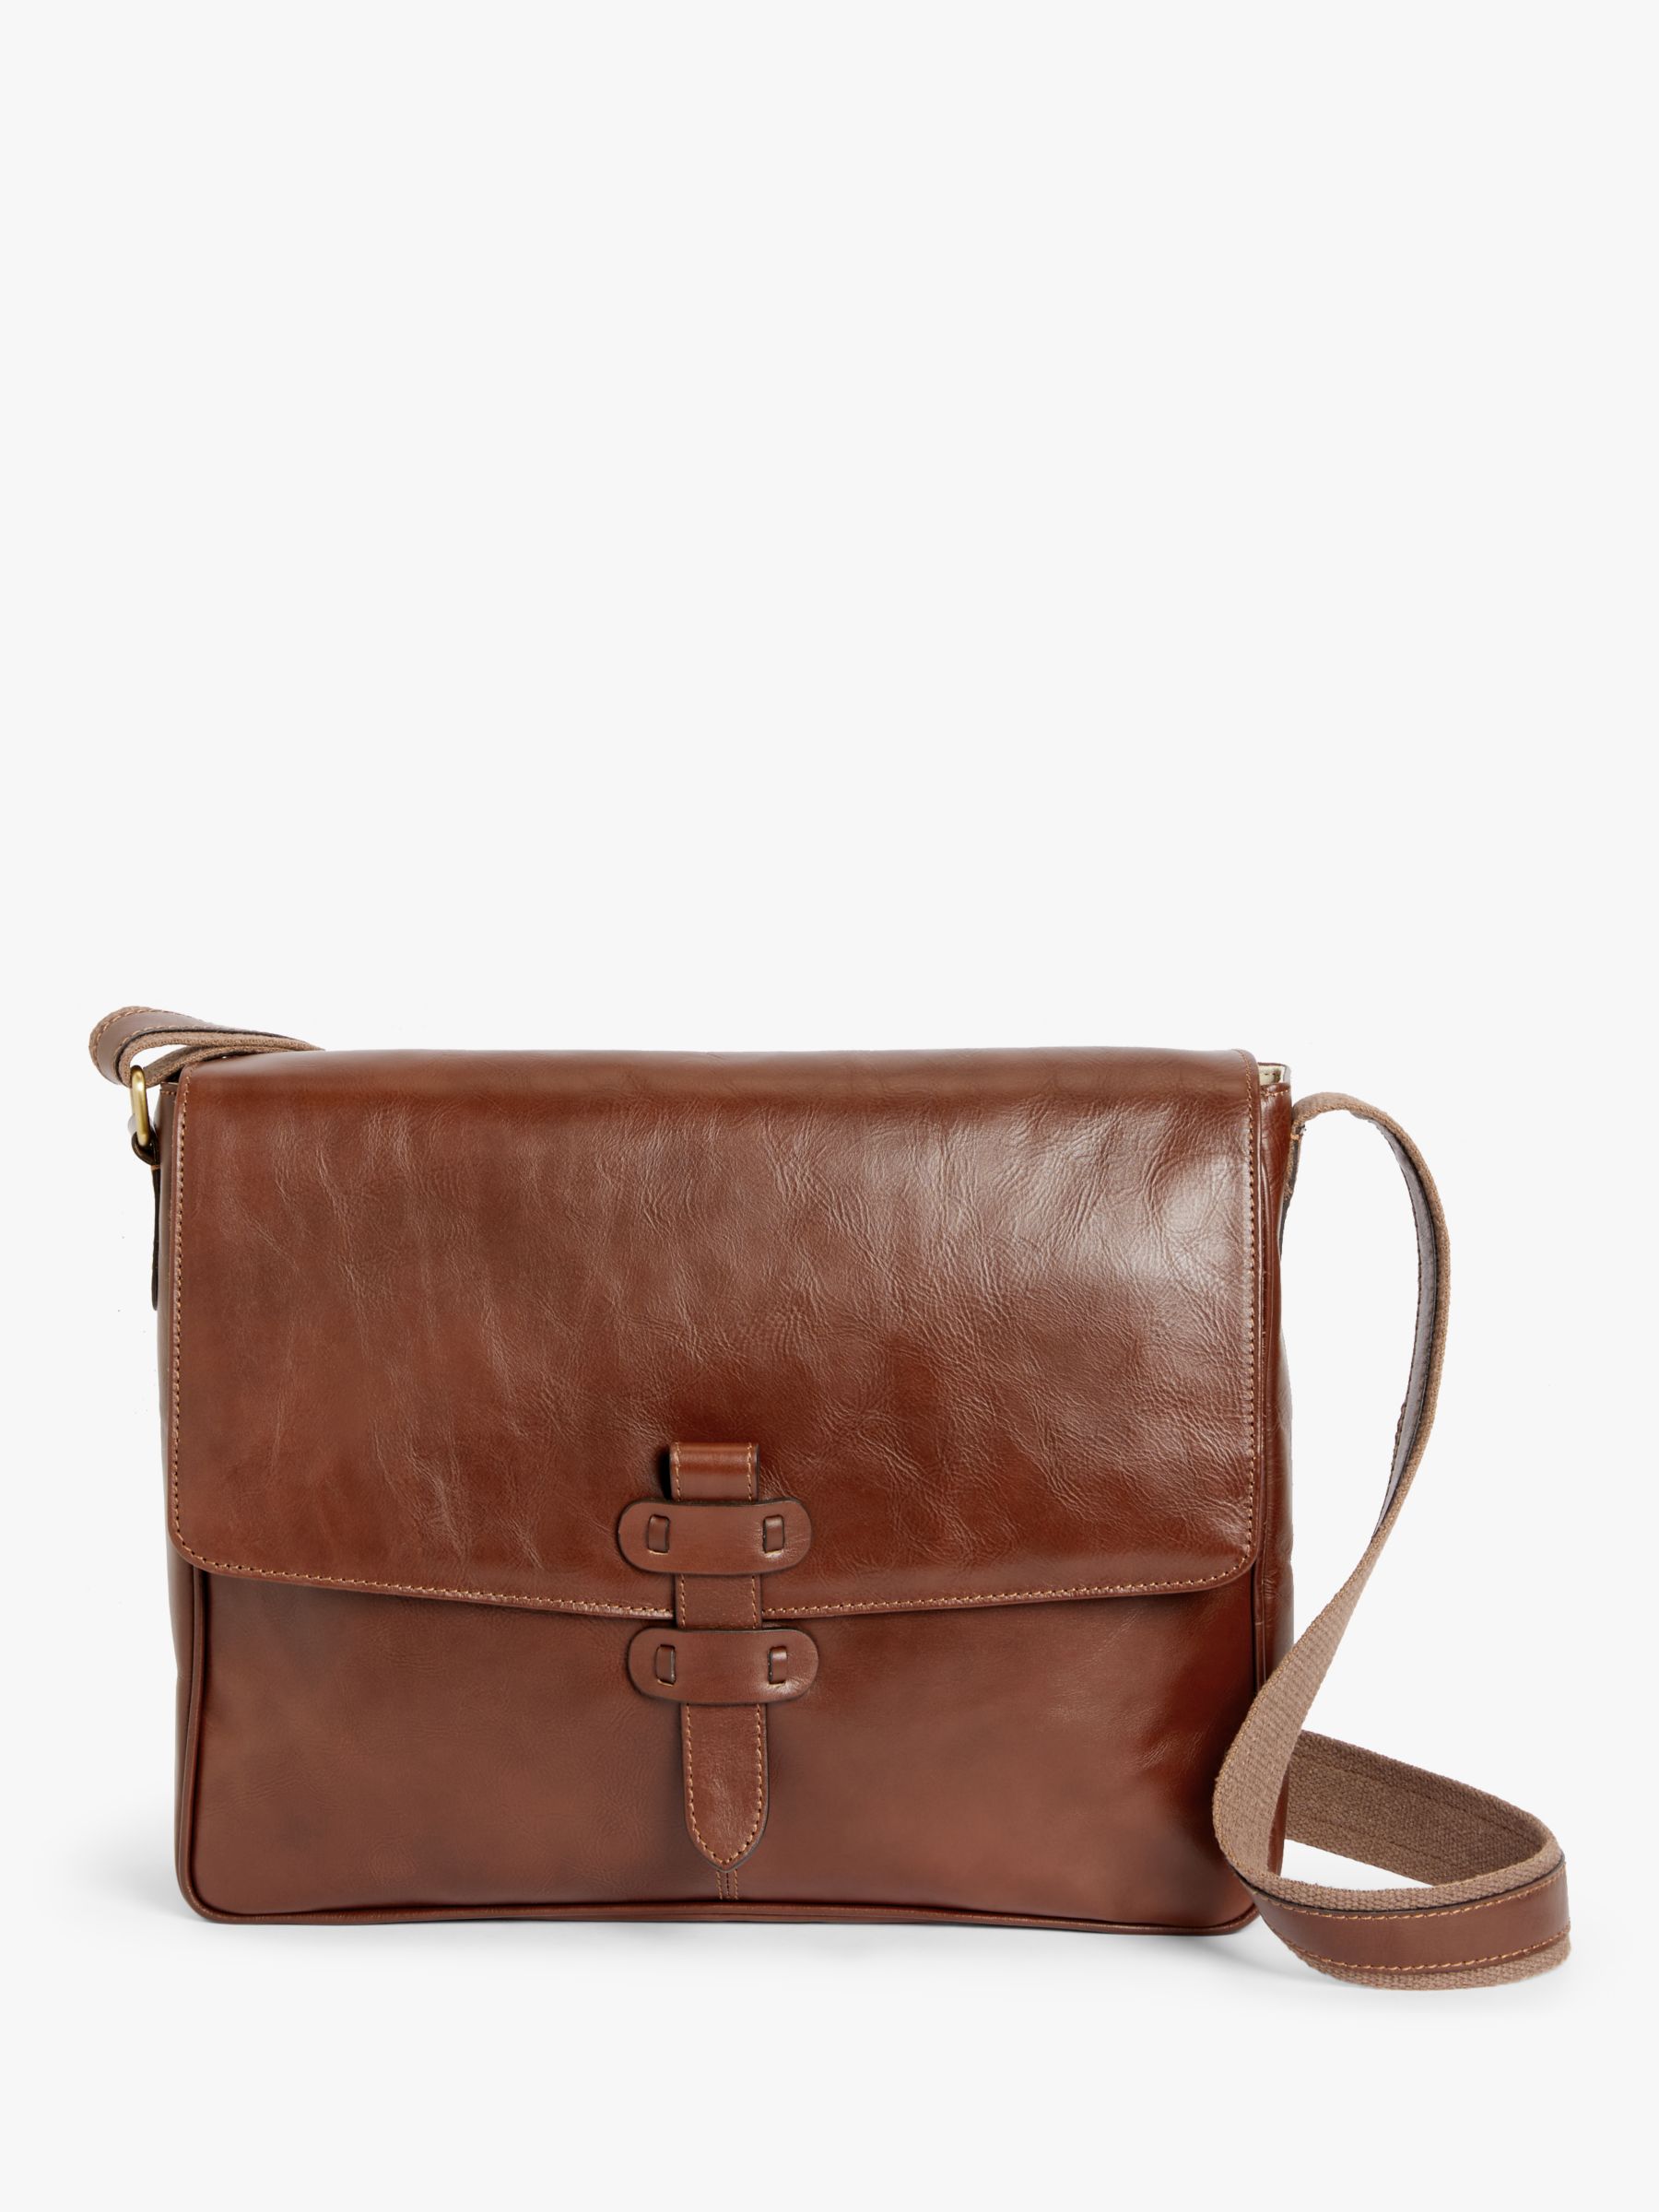 John Lewis Made in Italy Leather Messenger 2 Bag, Brown